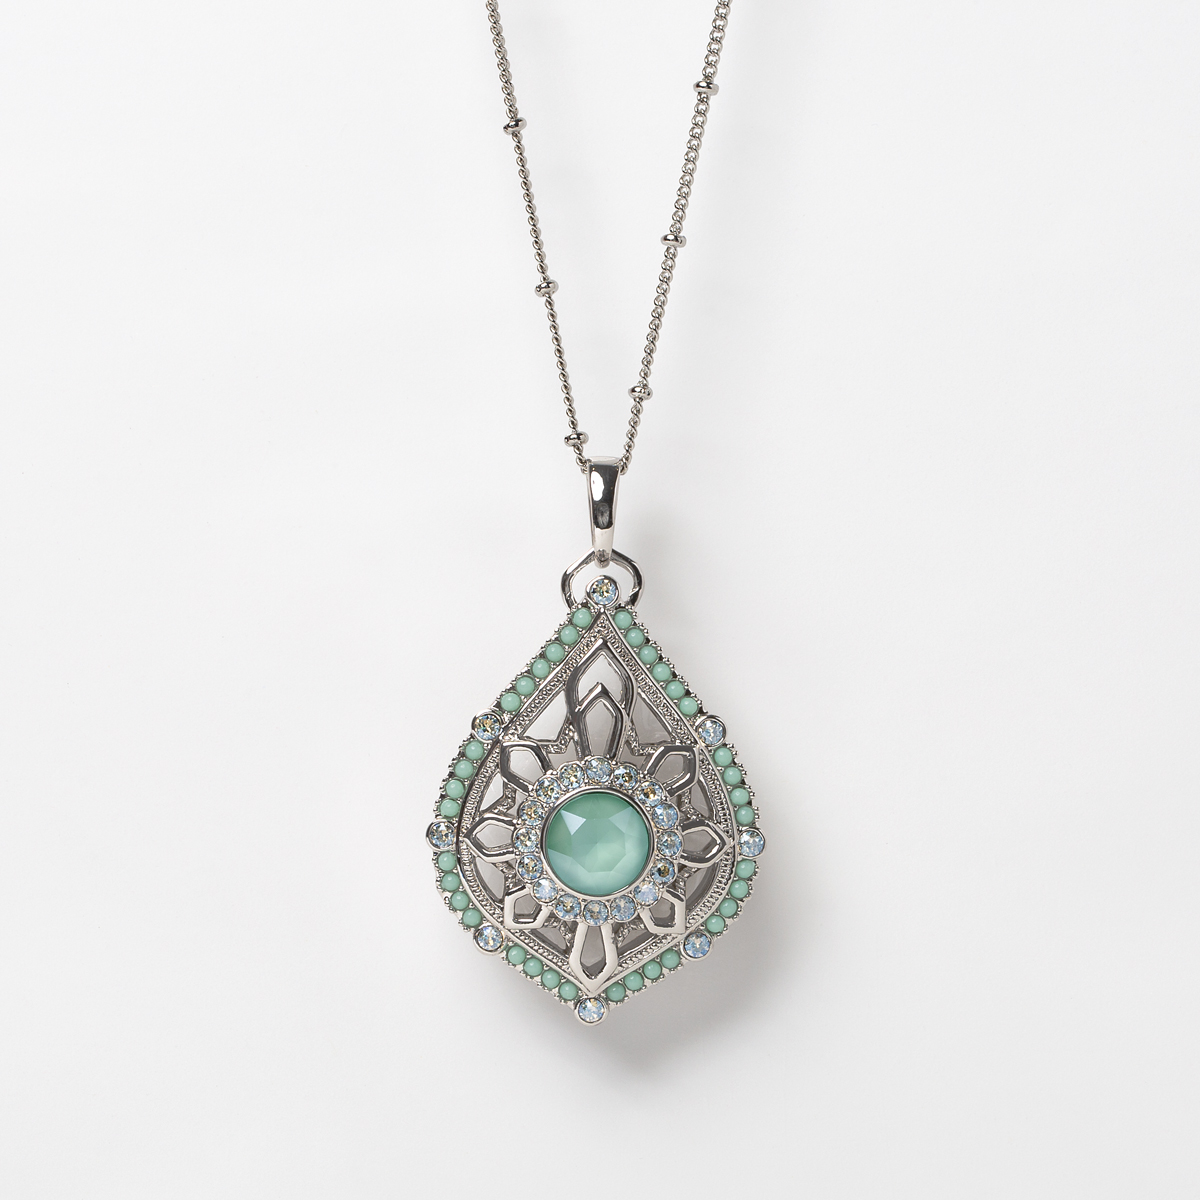 Origami Owl Spring Collection 2020 · life's little charms